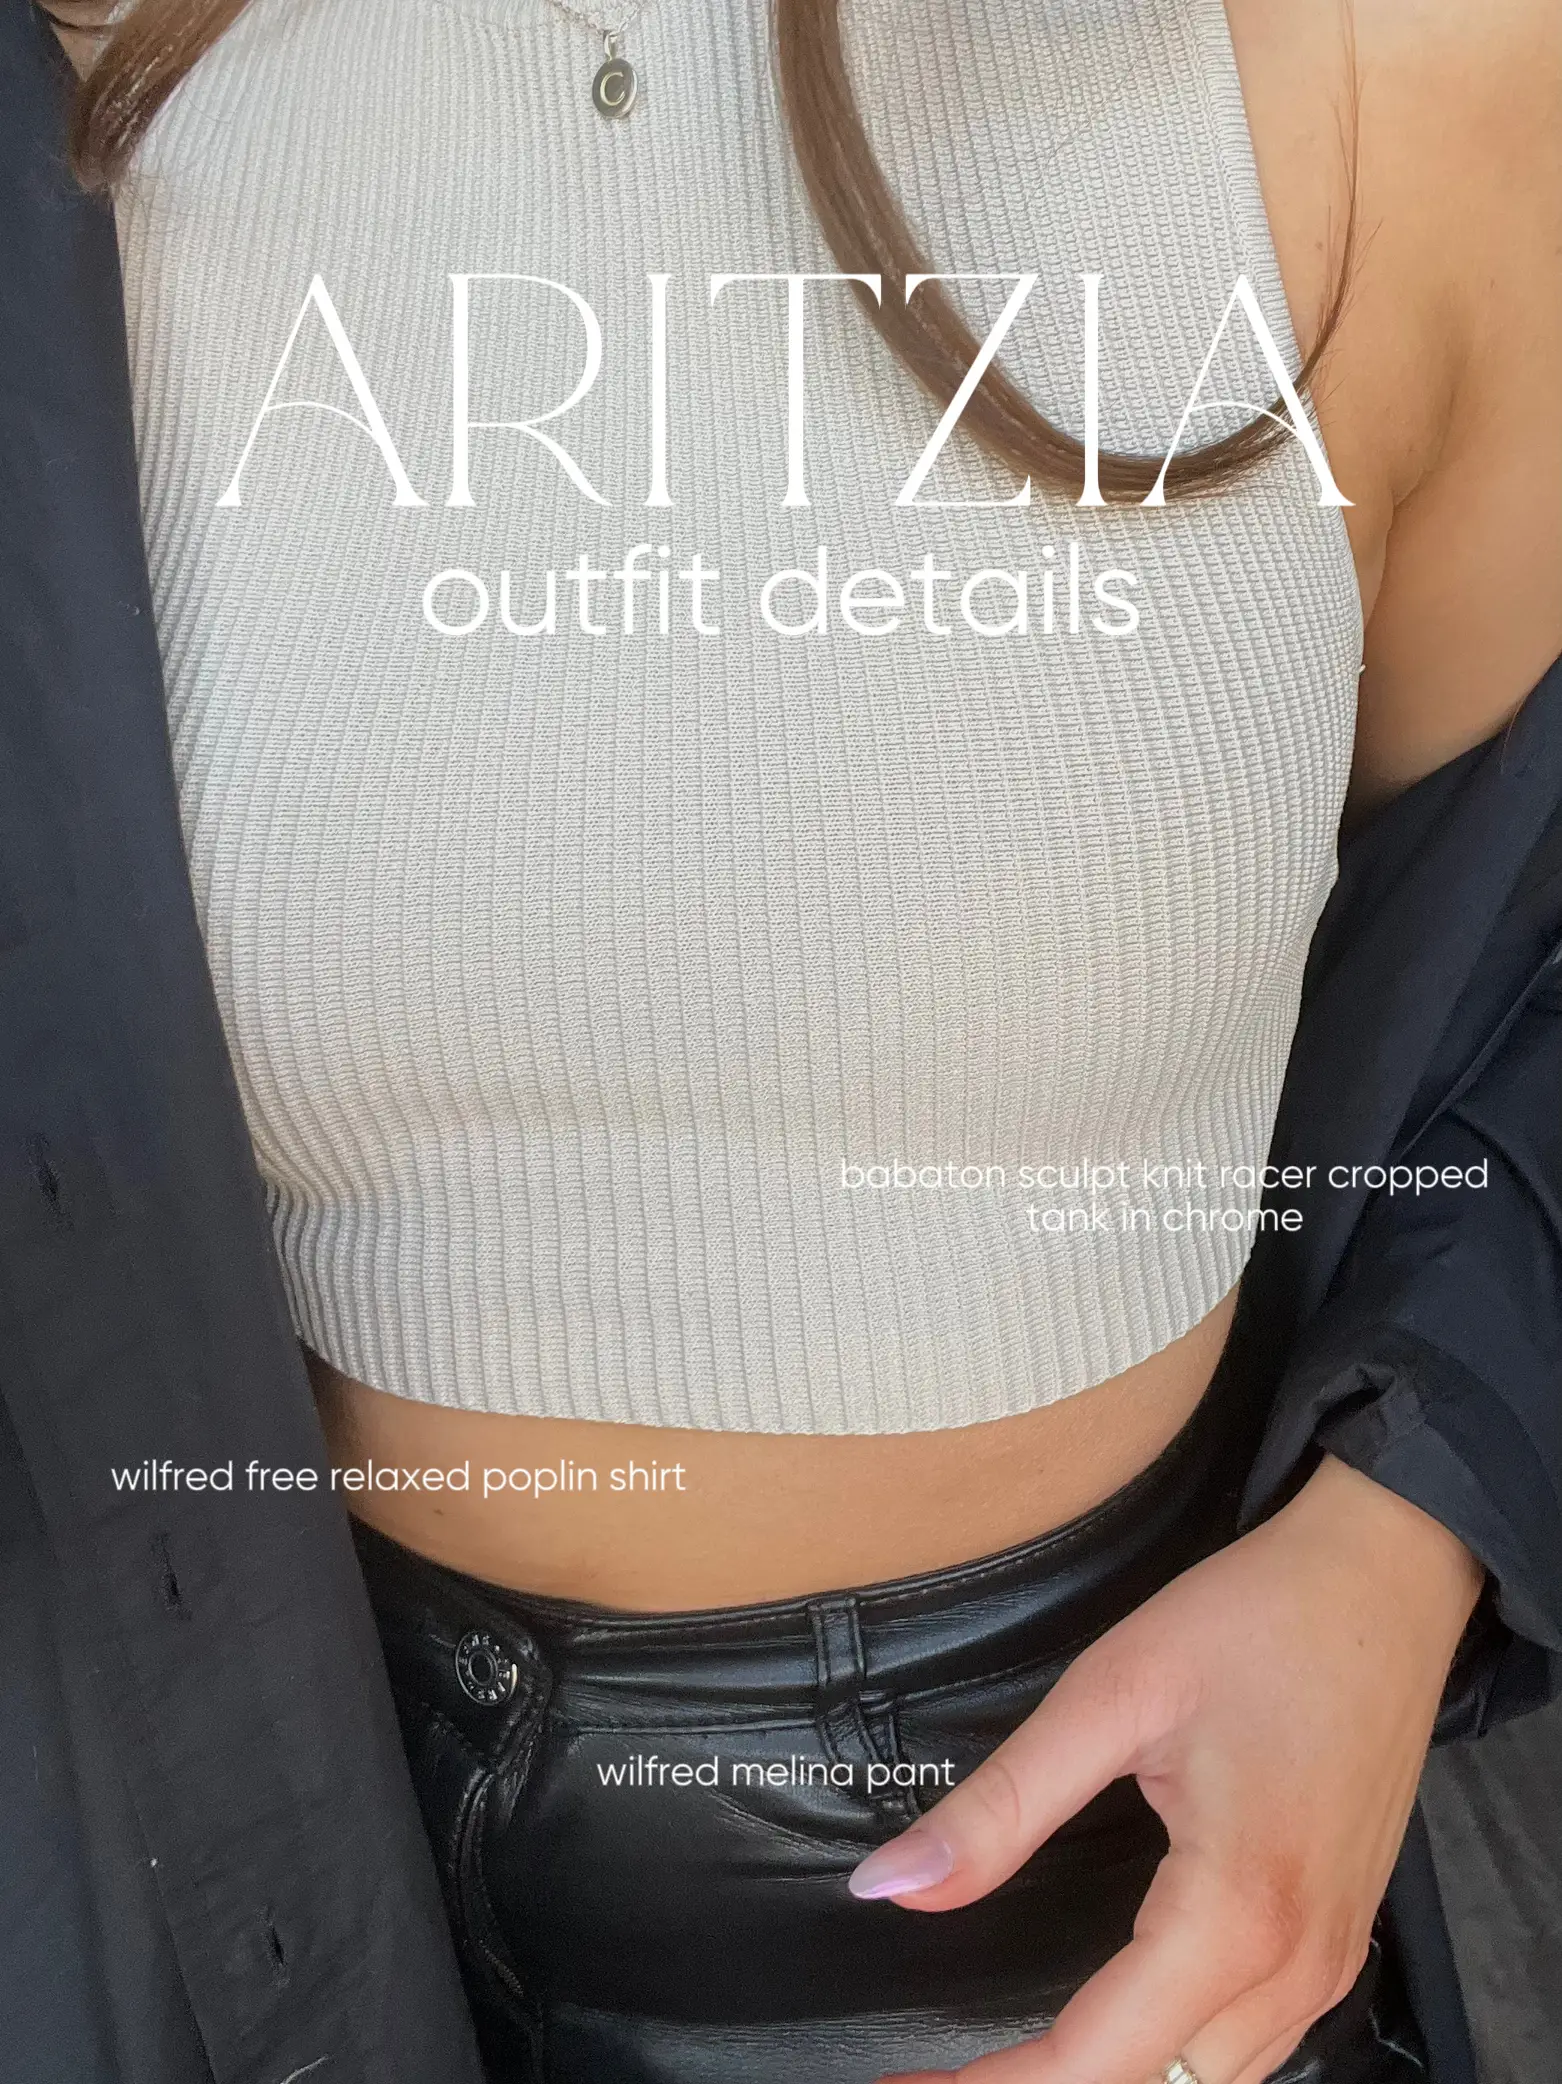 Aritzia Outfit Details🖤, Gallery posted by Maddie Josey